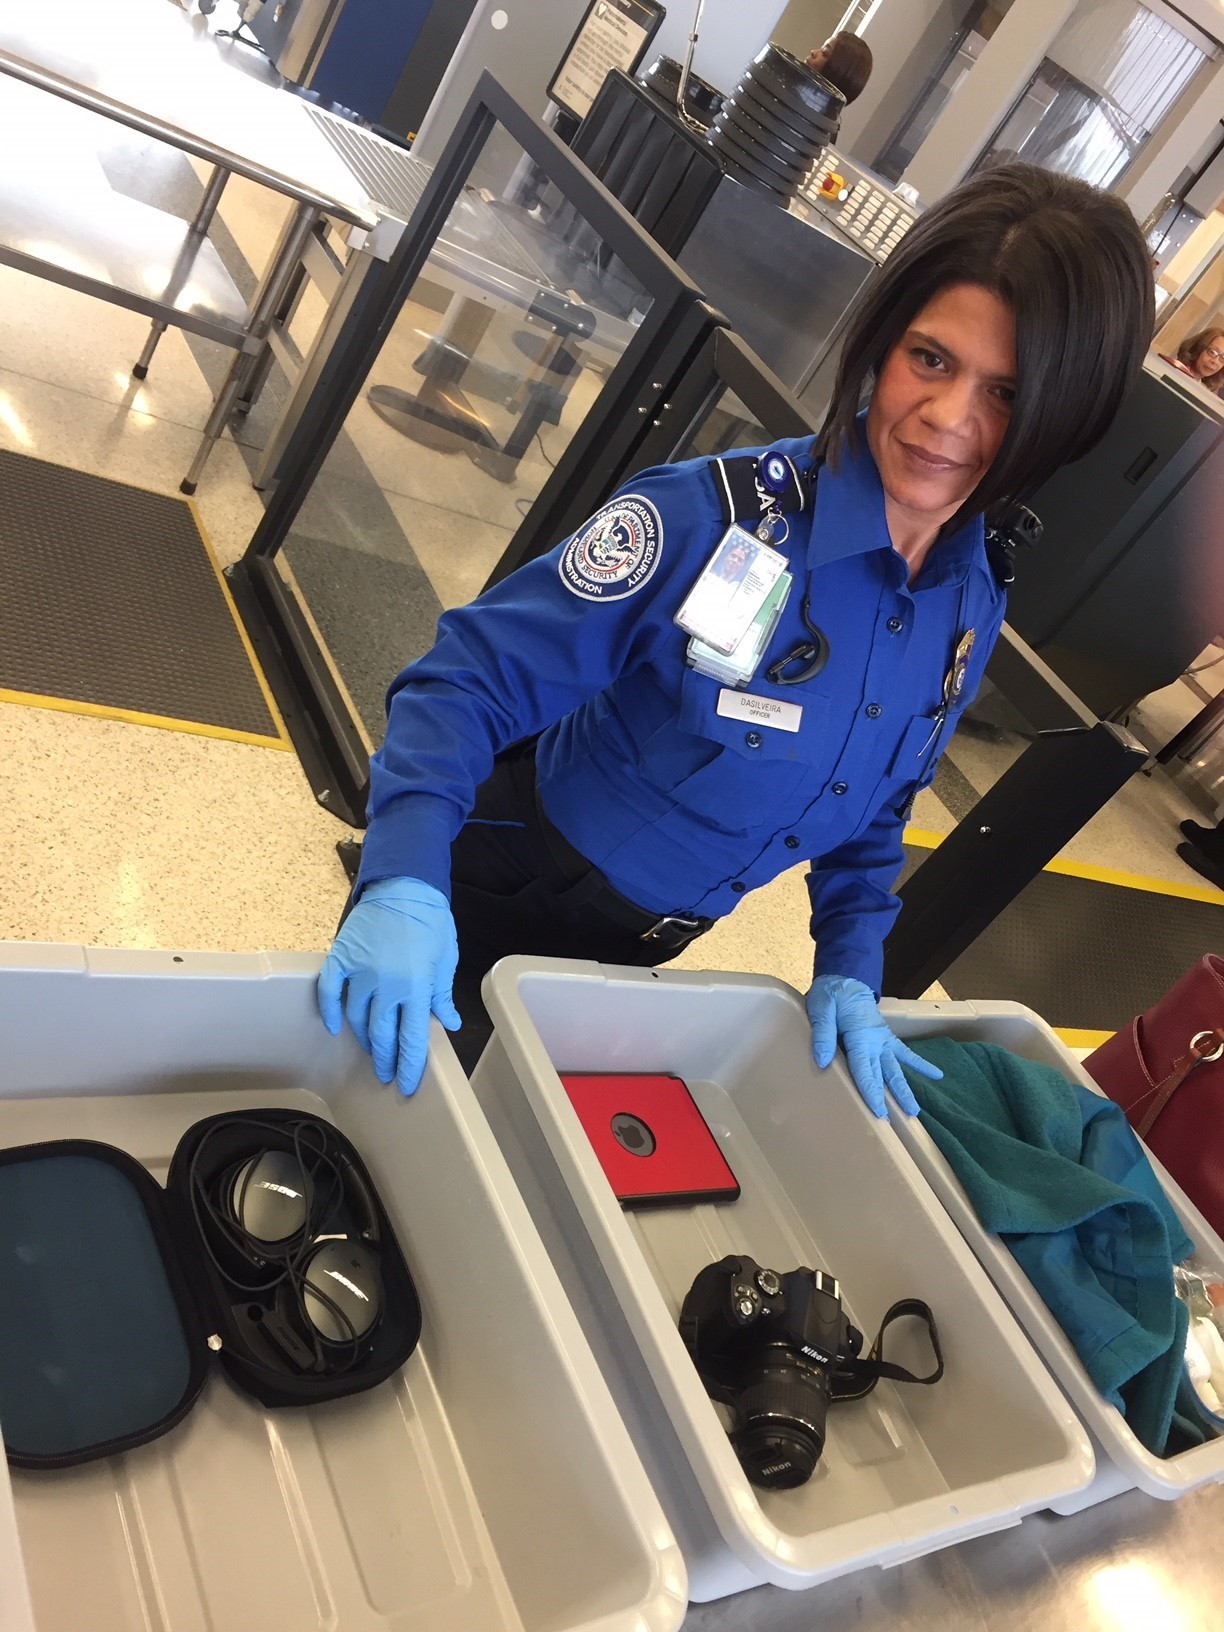 TSA officers at Norfolk International Airport are advising passengers to remove personal electronics that are larger than a cell phone from their carry-on bags and place them in bins at the checkpoint as an enhancement of security. (TSA photo)